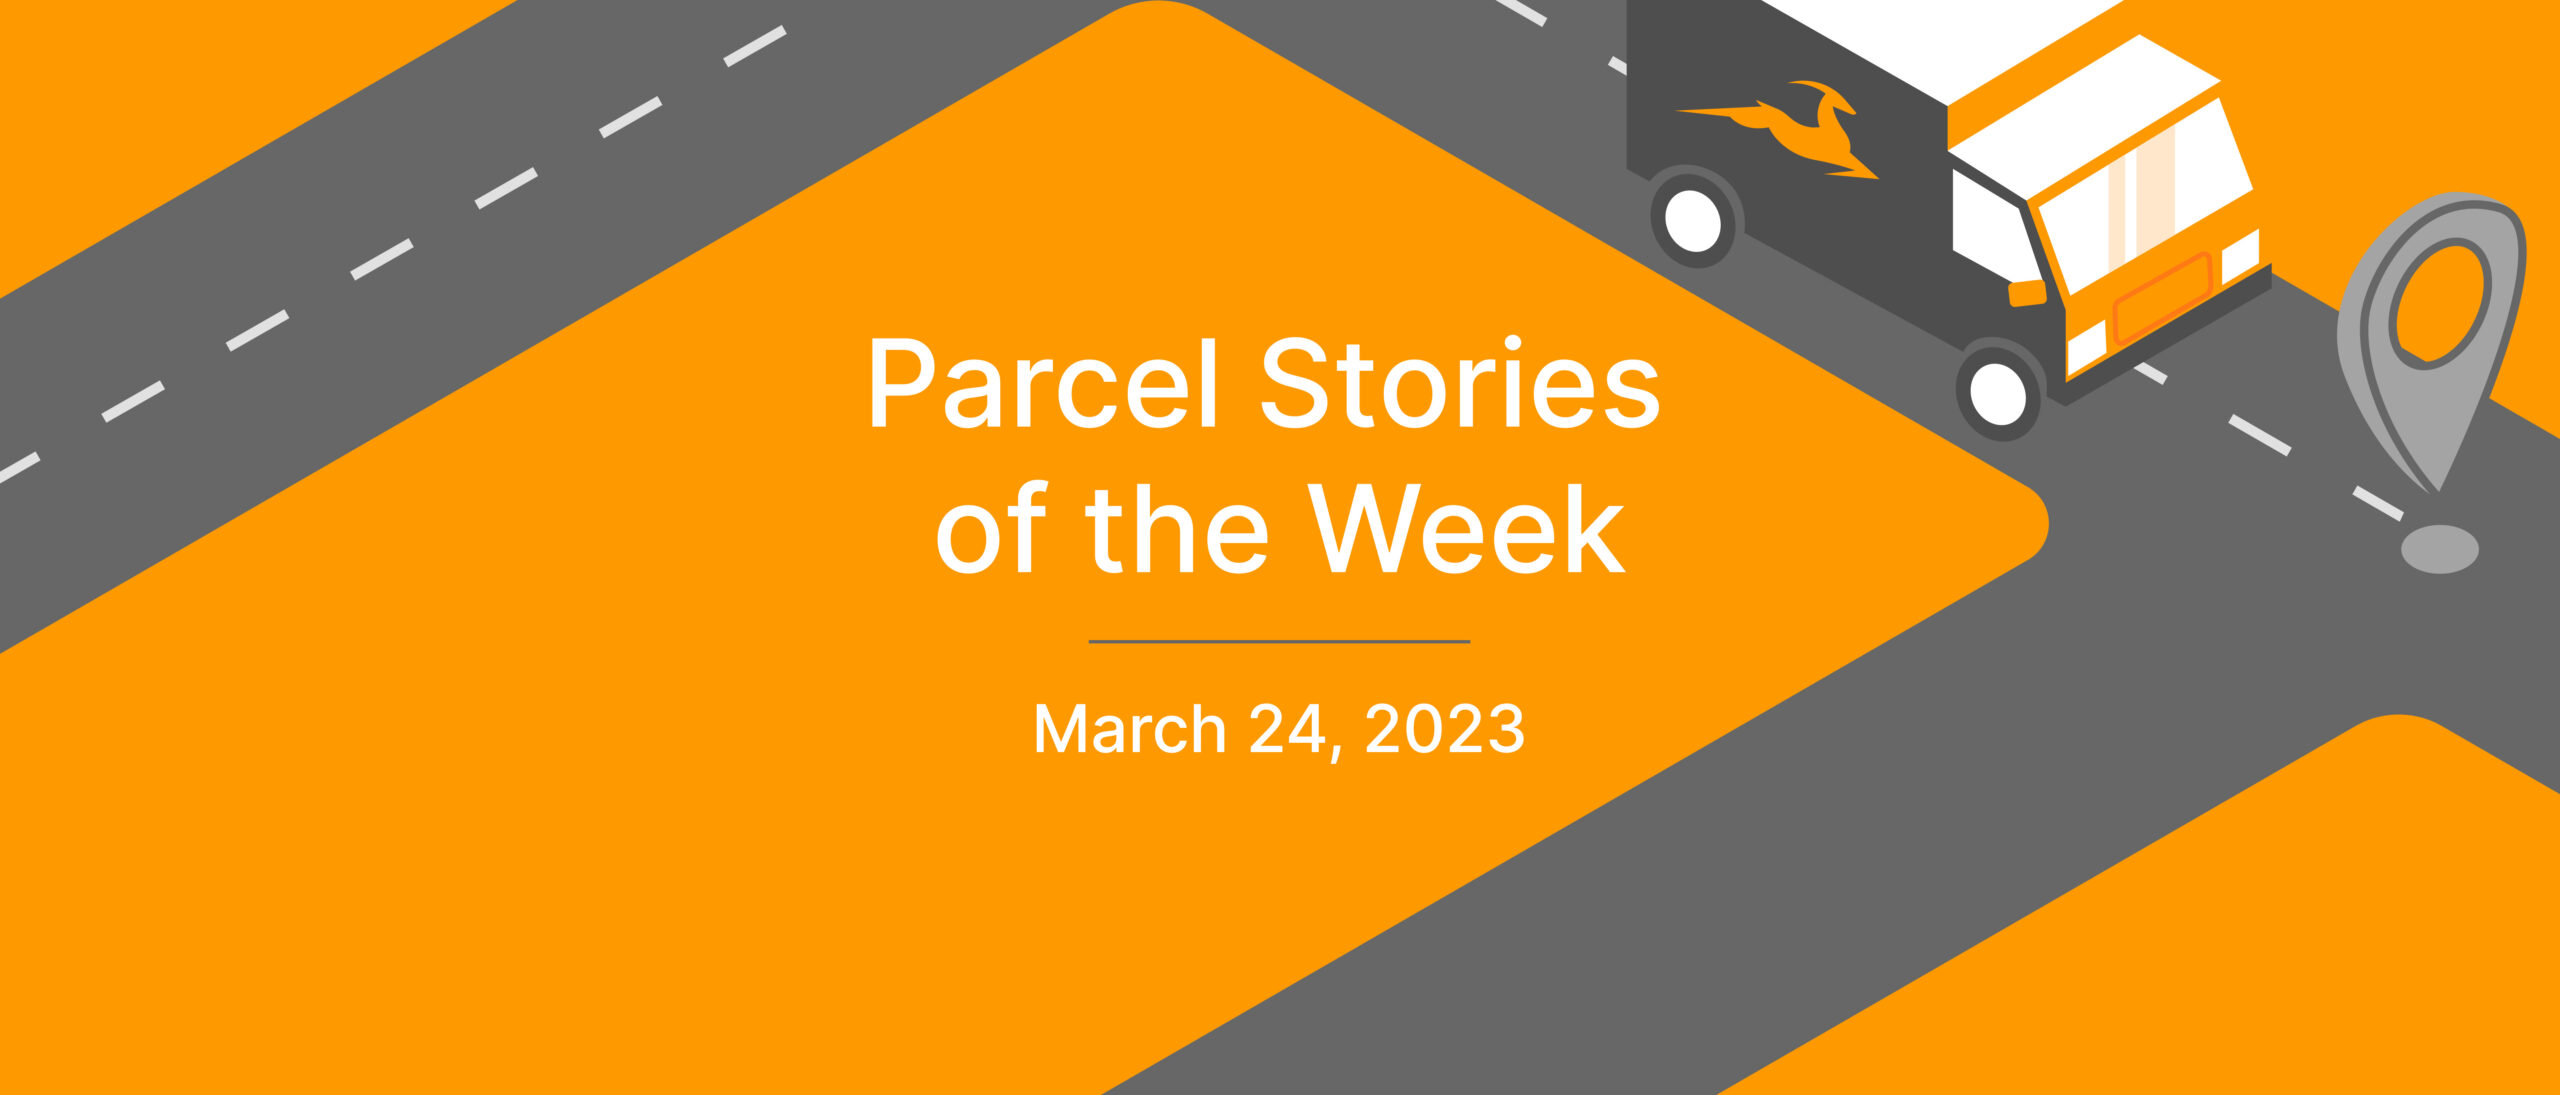 This Week in Parcel: March 24, 2023